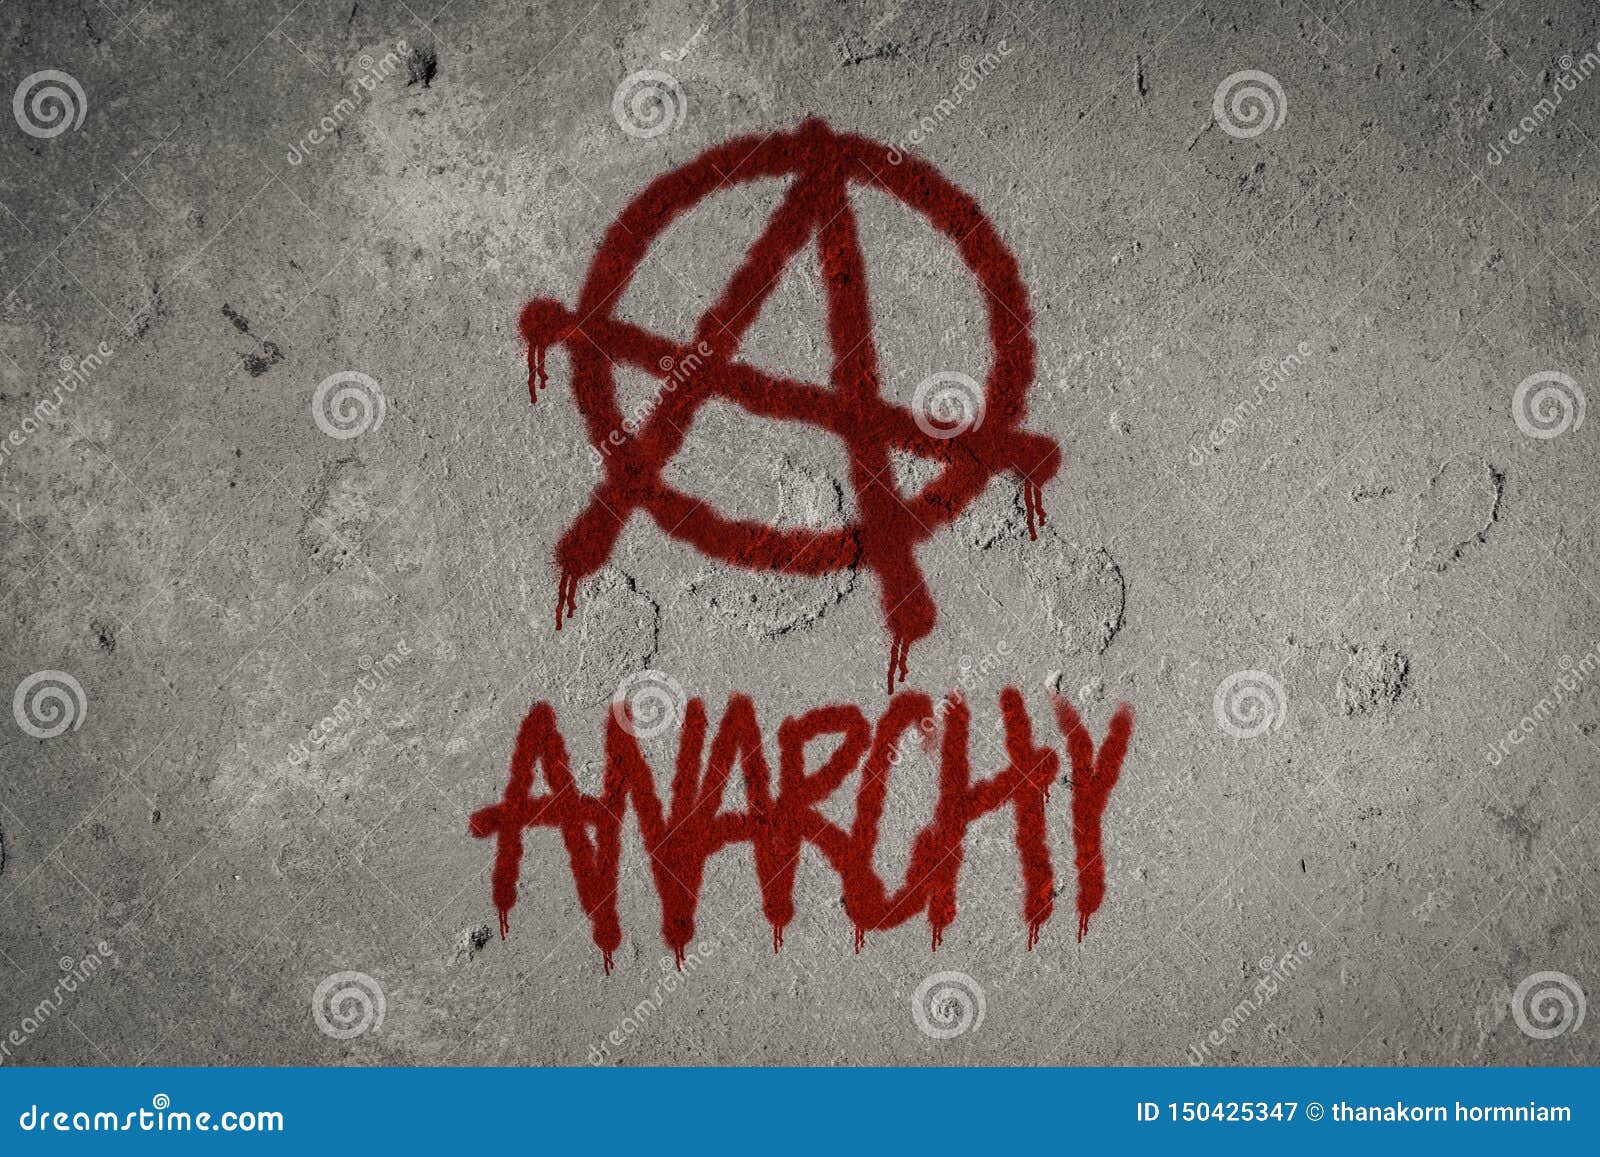 anarchy  spray painted on the wall